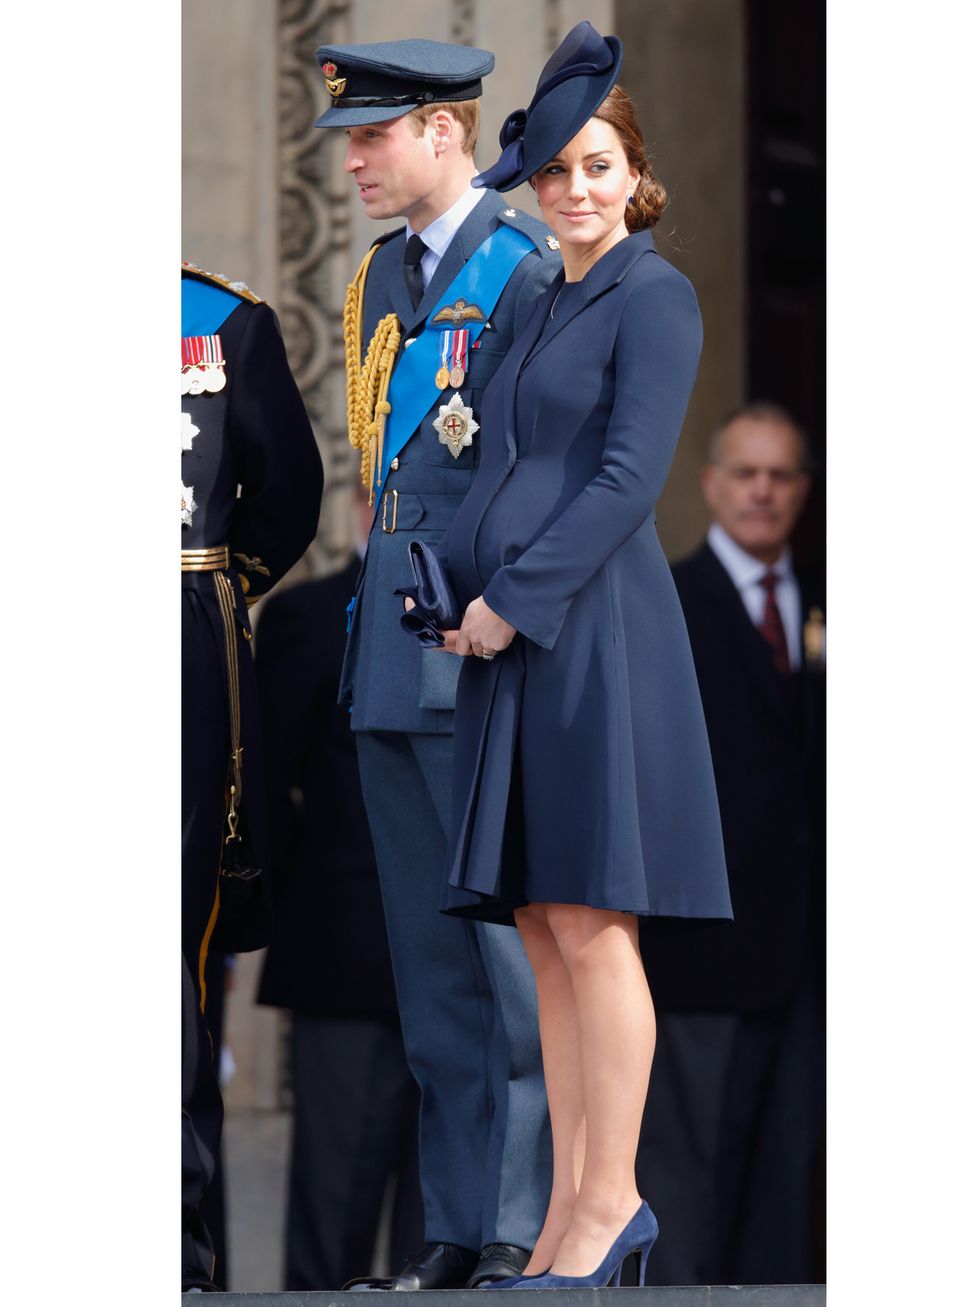 Clothing, Uniform, Academic dress, Trench coat, Standing, Fashion, Coat, Electric blue, Outerwear, Street fashion, 